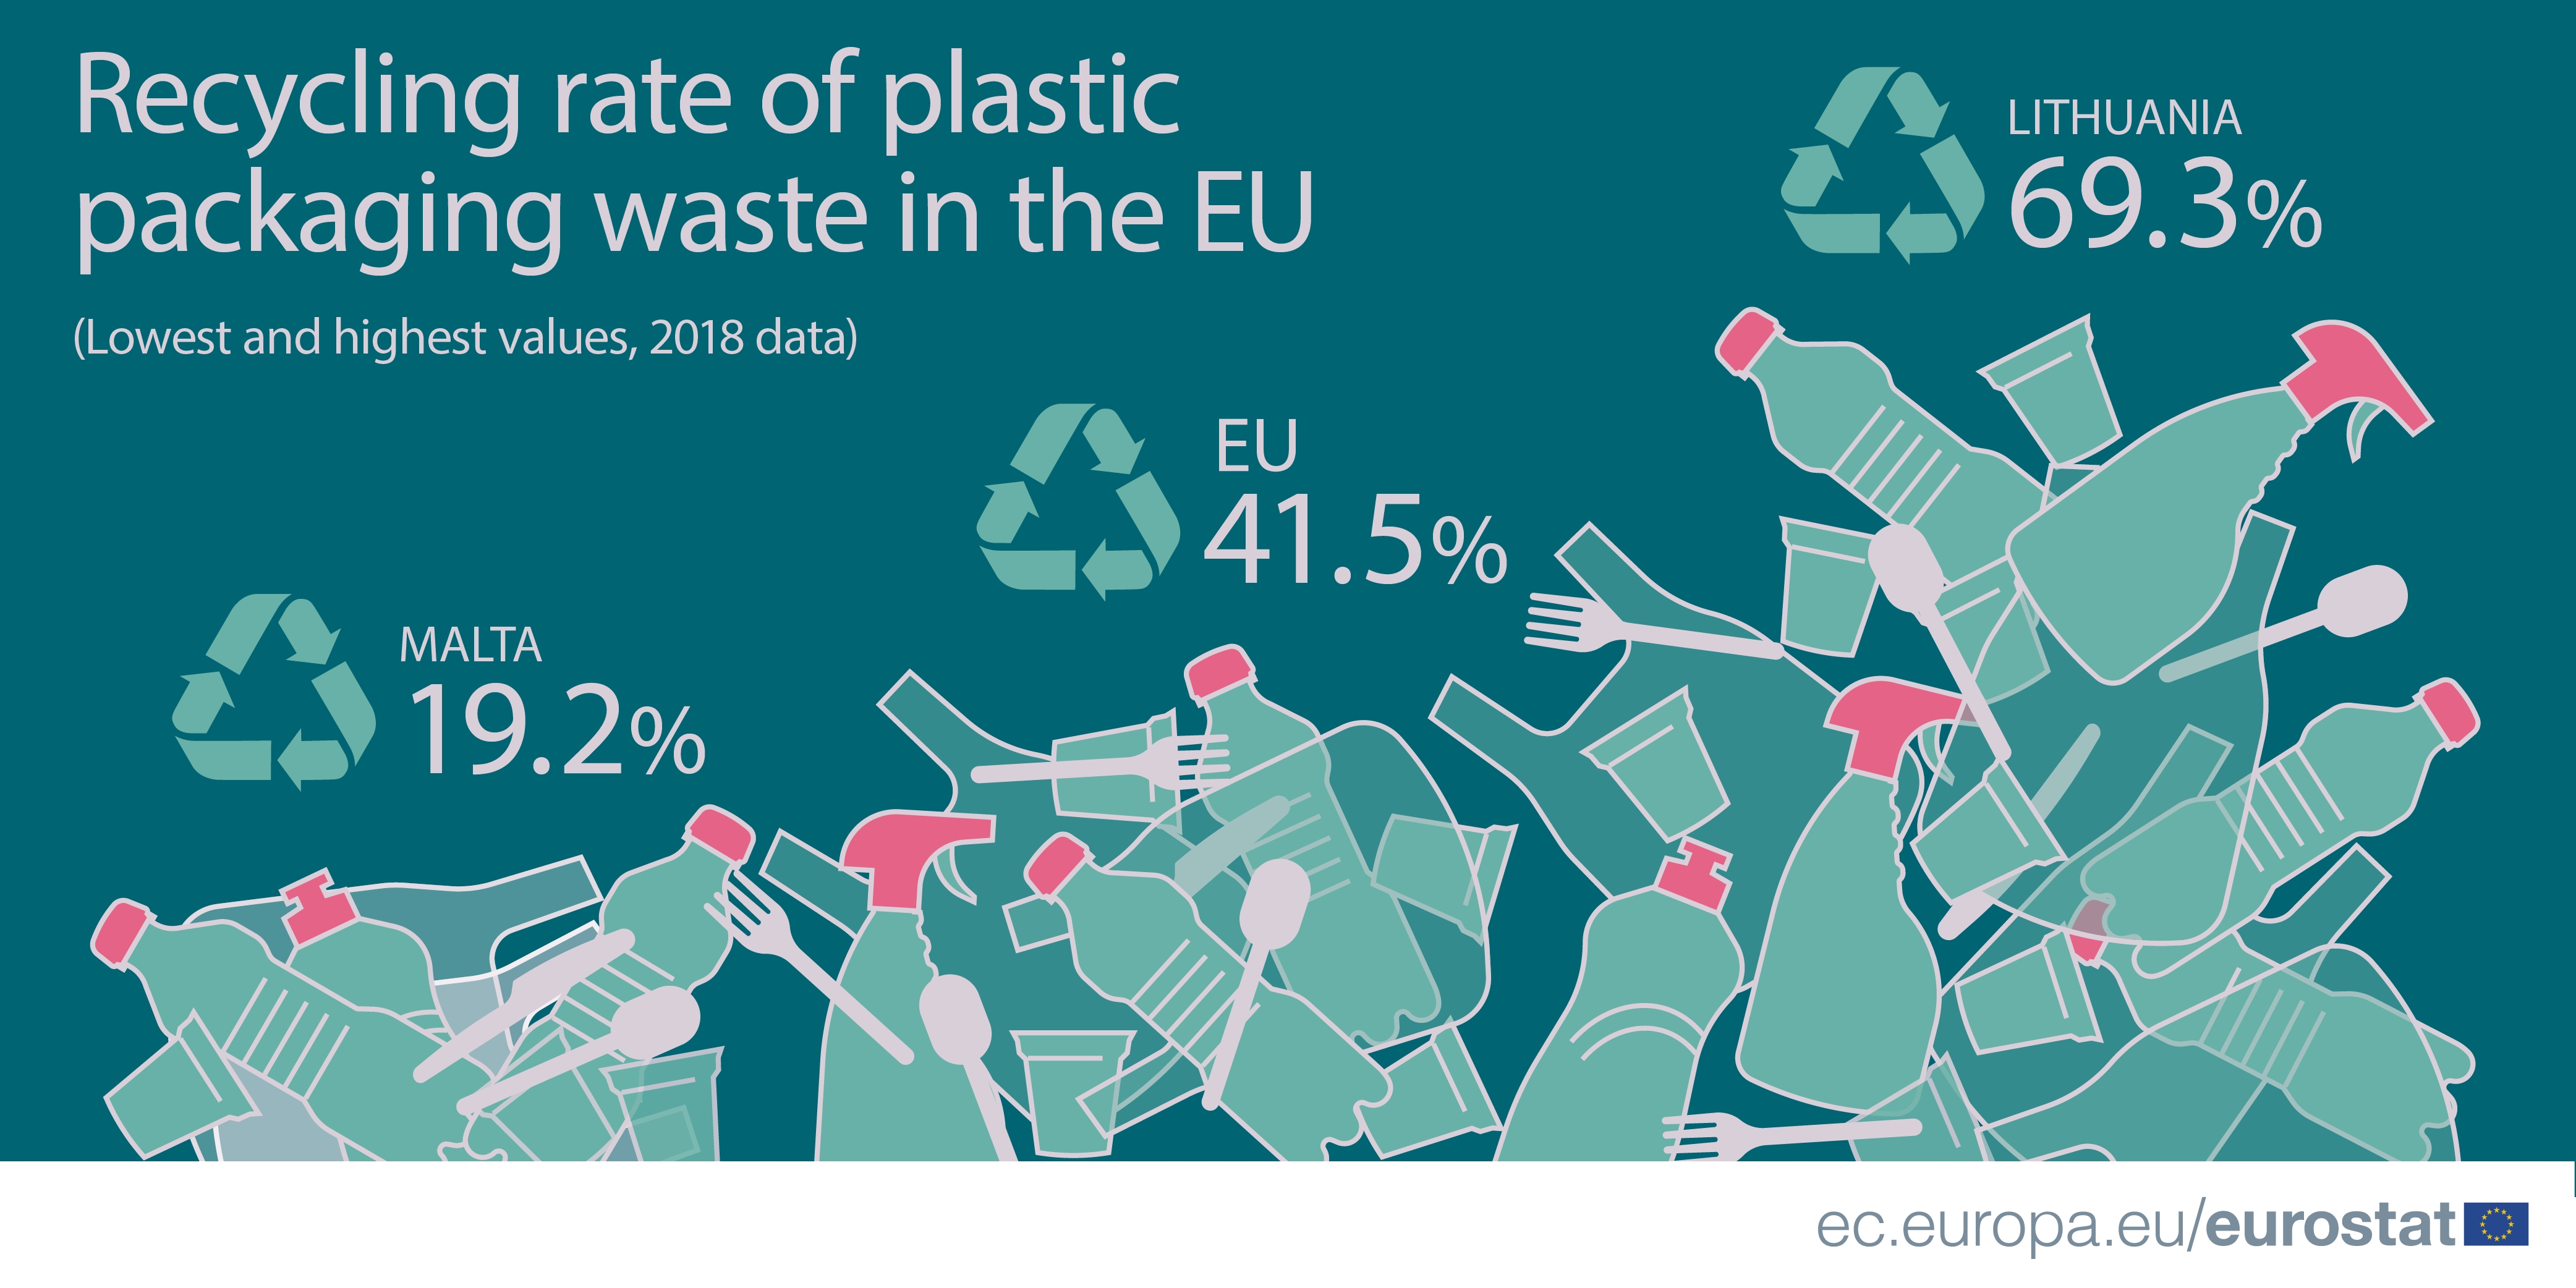 Over 40% of EU plastic packaging waste recycled 